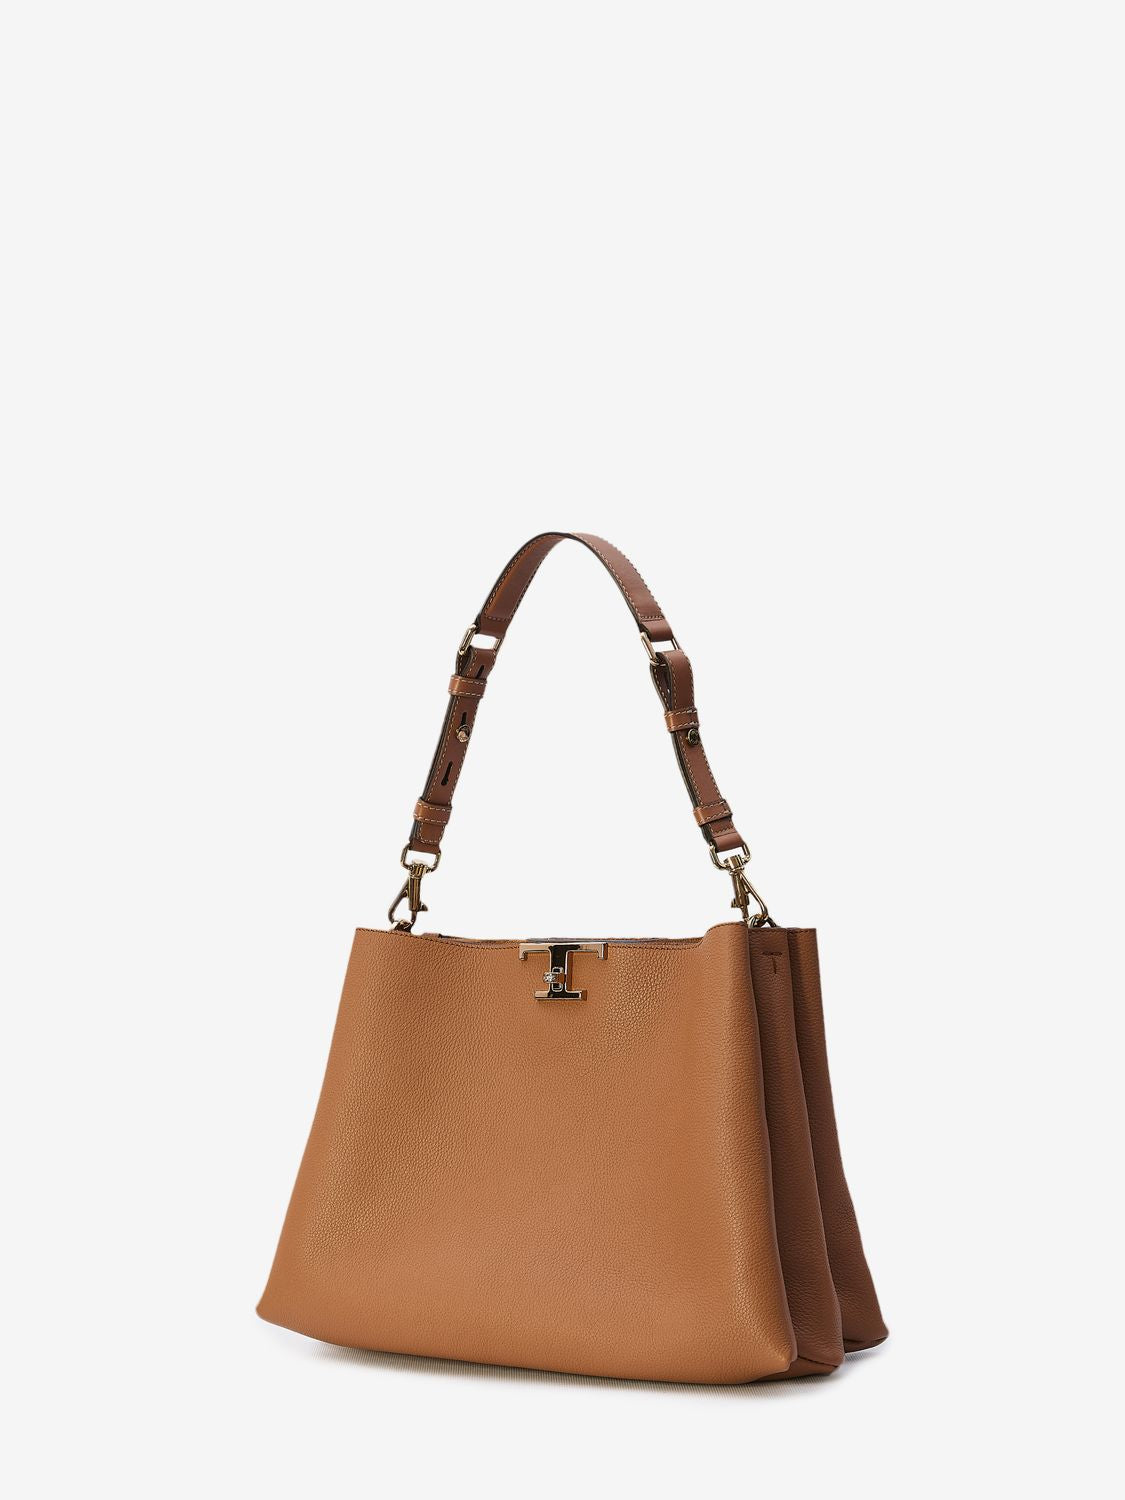 TOD'S Timeless Medium Brown Grained Calfskin Shoulder Bag with Adjustable Strap, Suede Lining, and Metal Buckle, 14x10x6 in